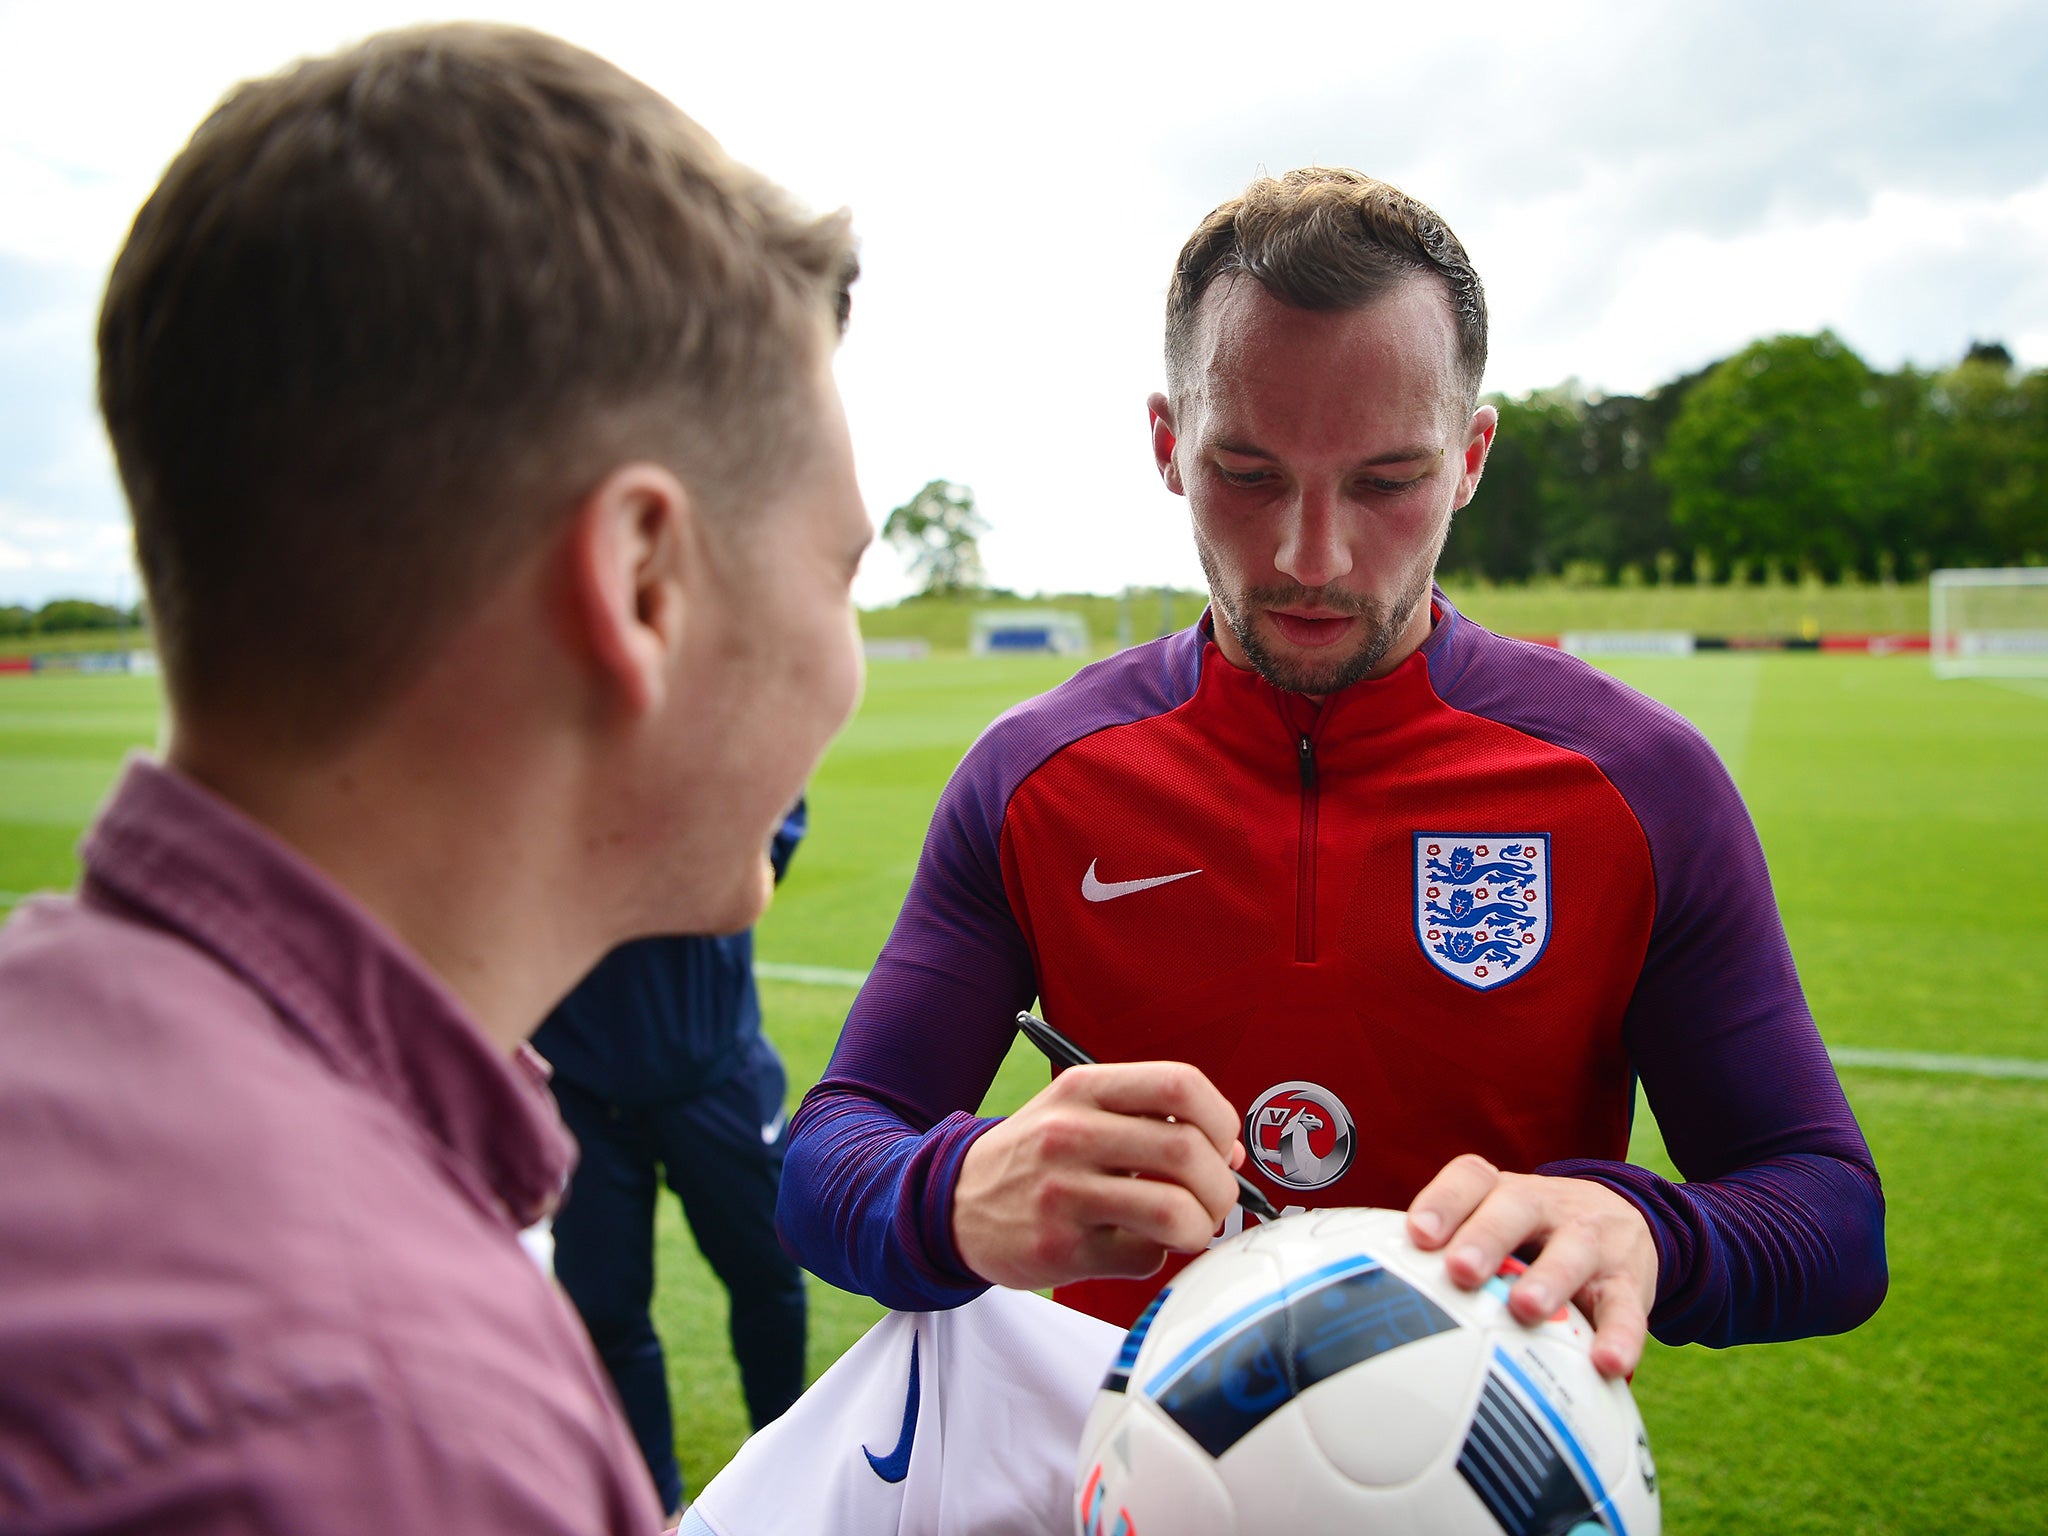 Drinkwater greets fans during an England training session